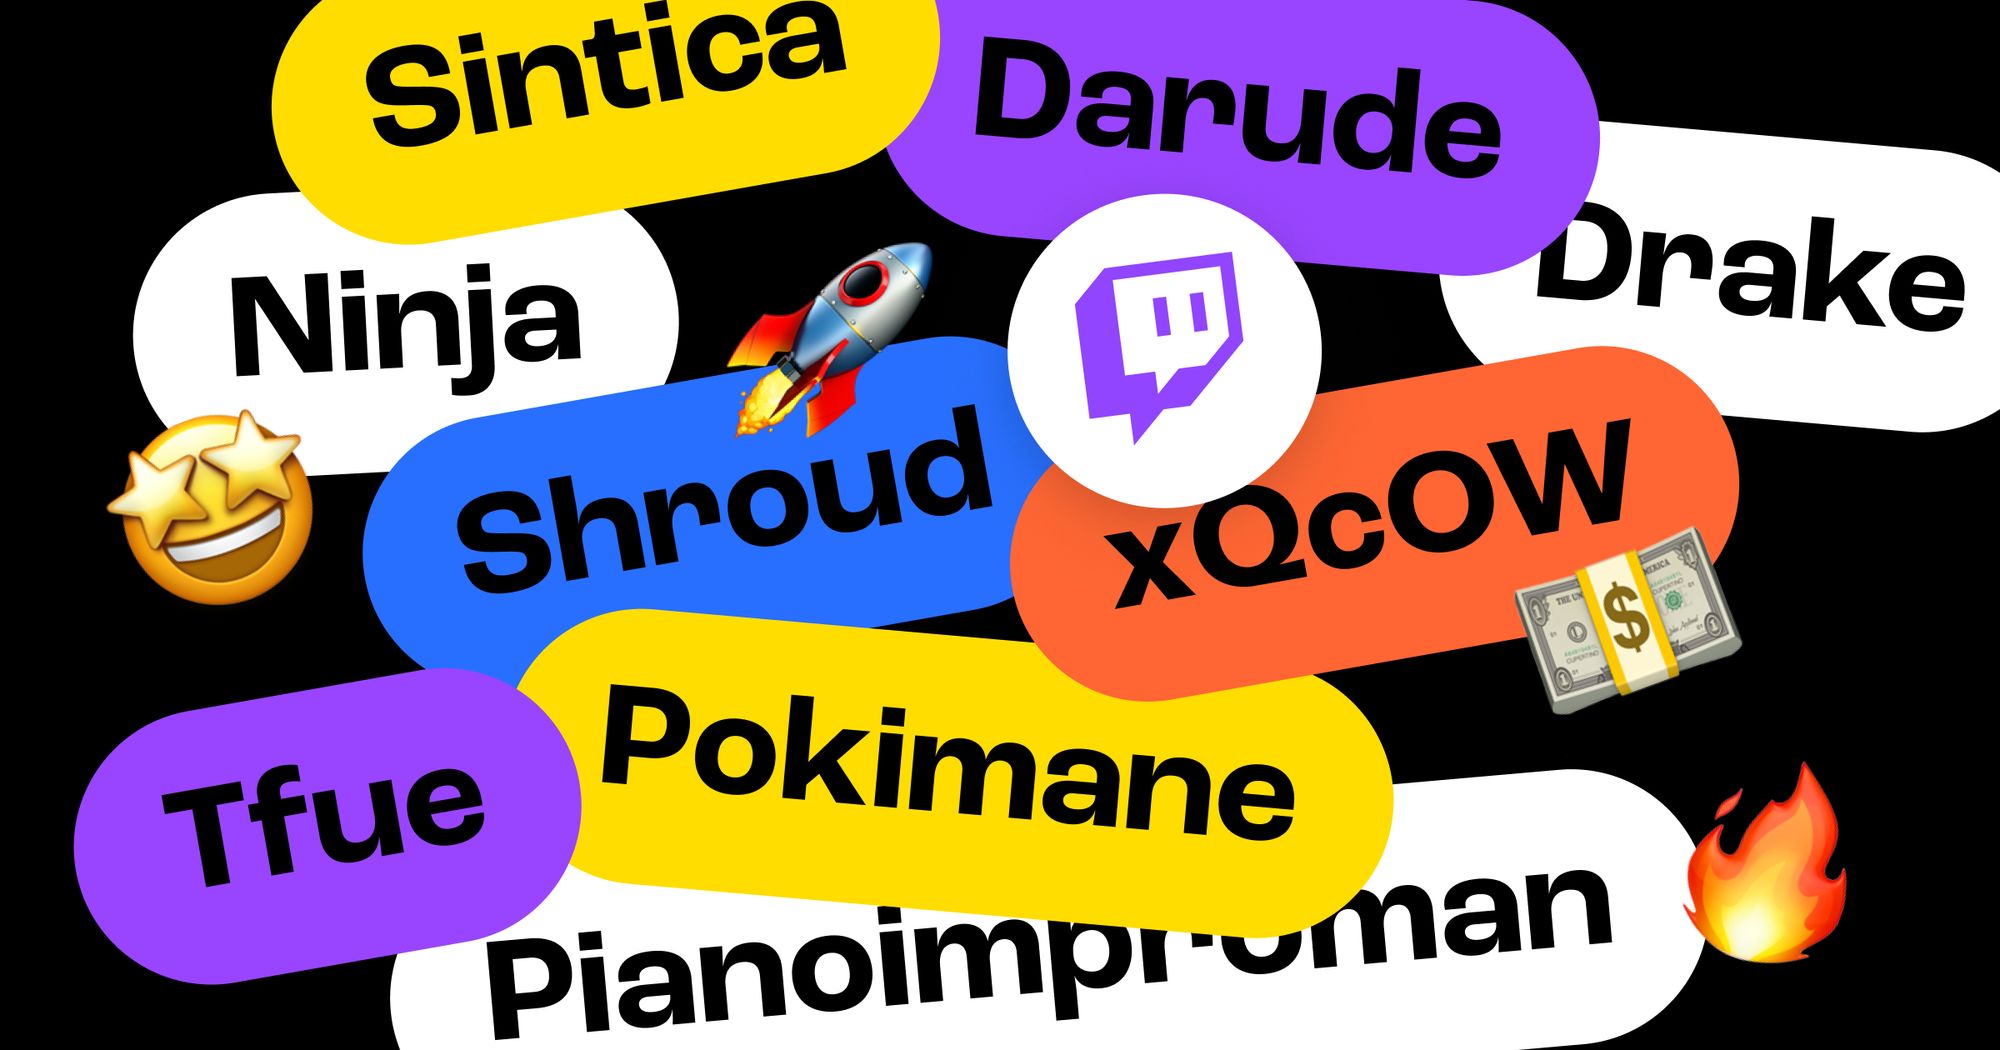 The most popular Twitch streamers success stories